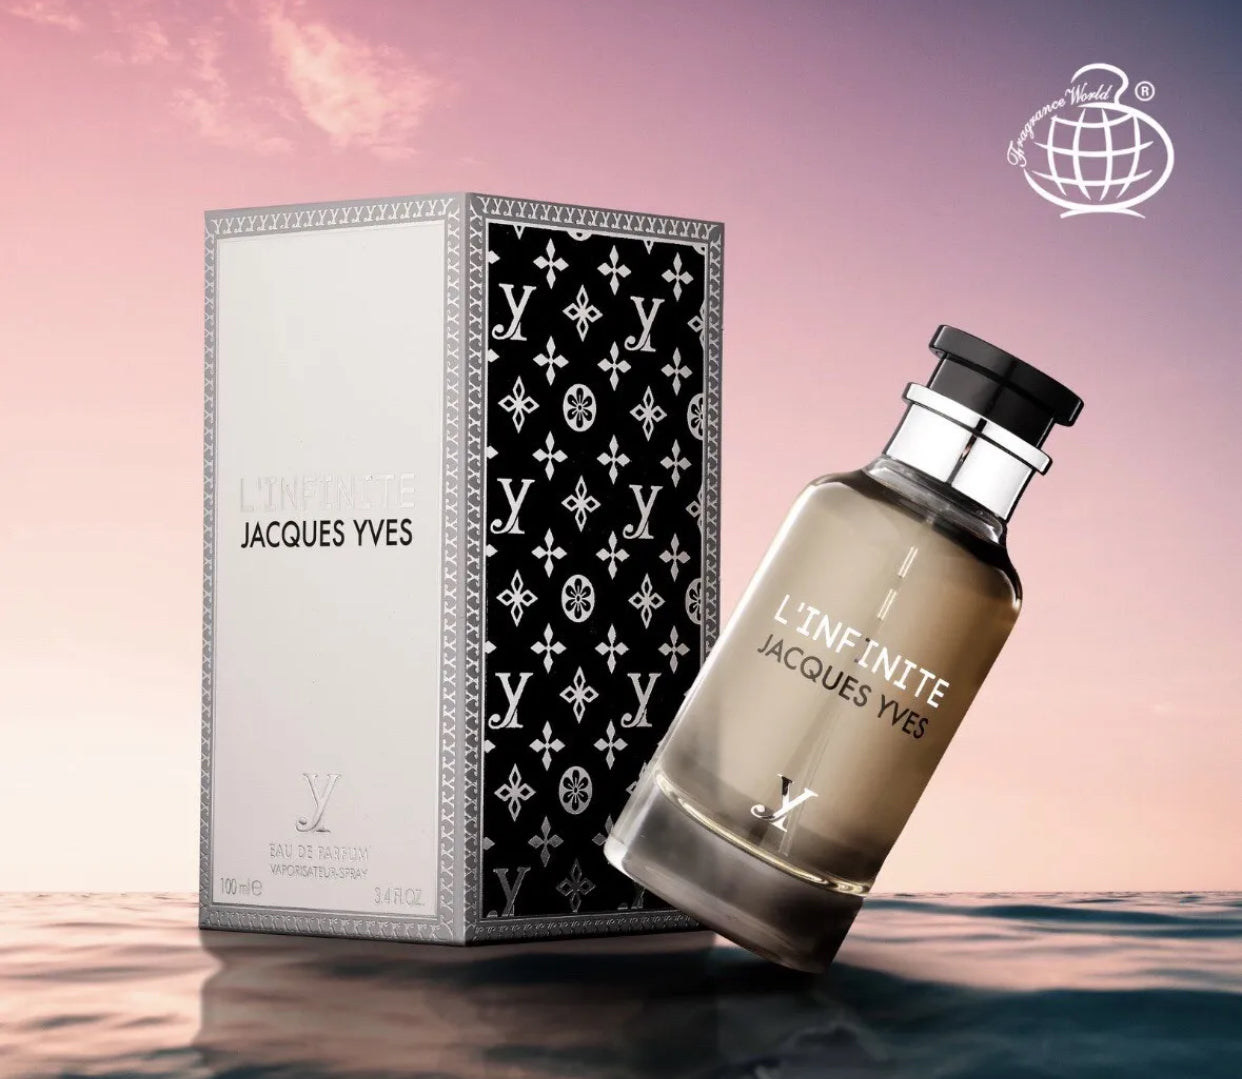 L’INFINITE JACQUES YVES BY FRAGRANCE WORLD 10 ml sample